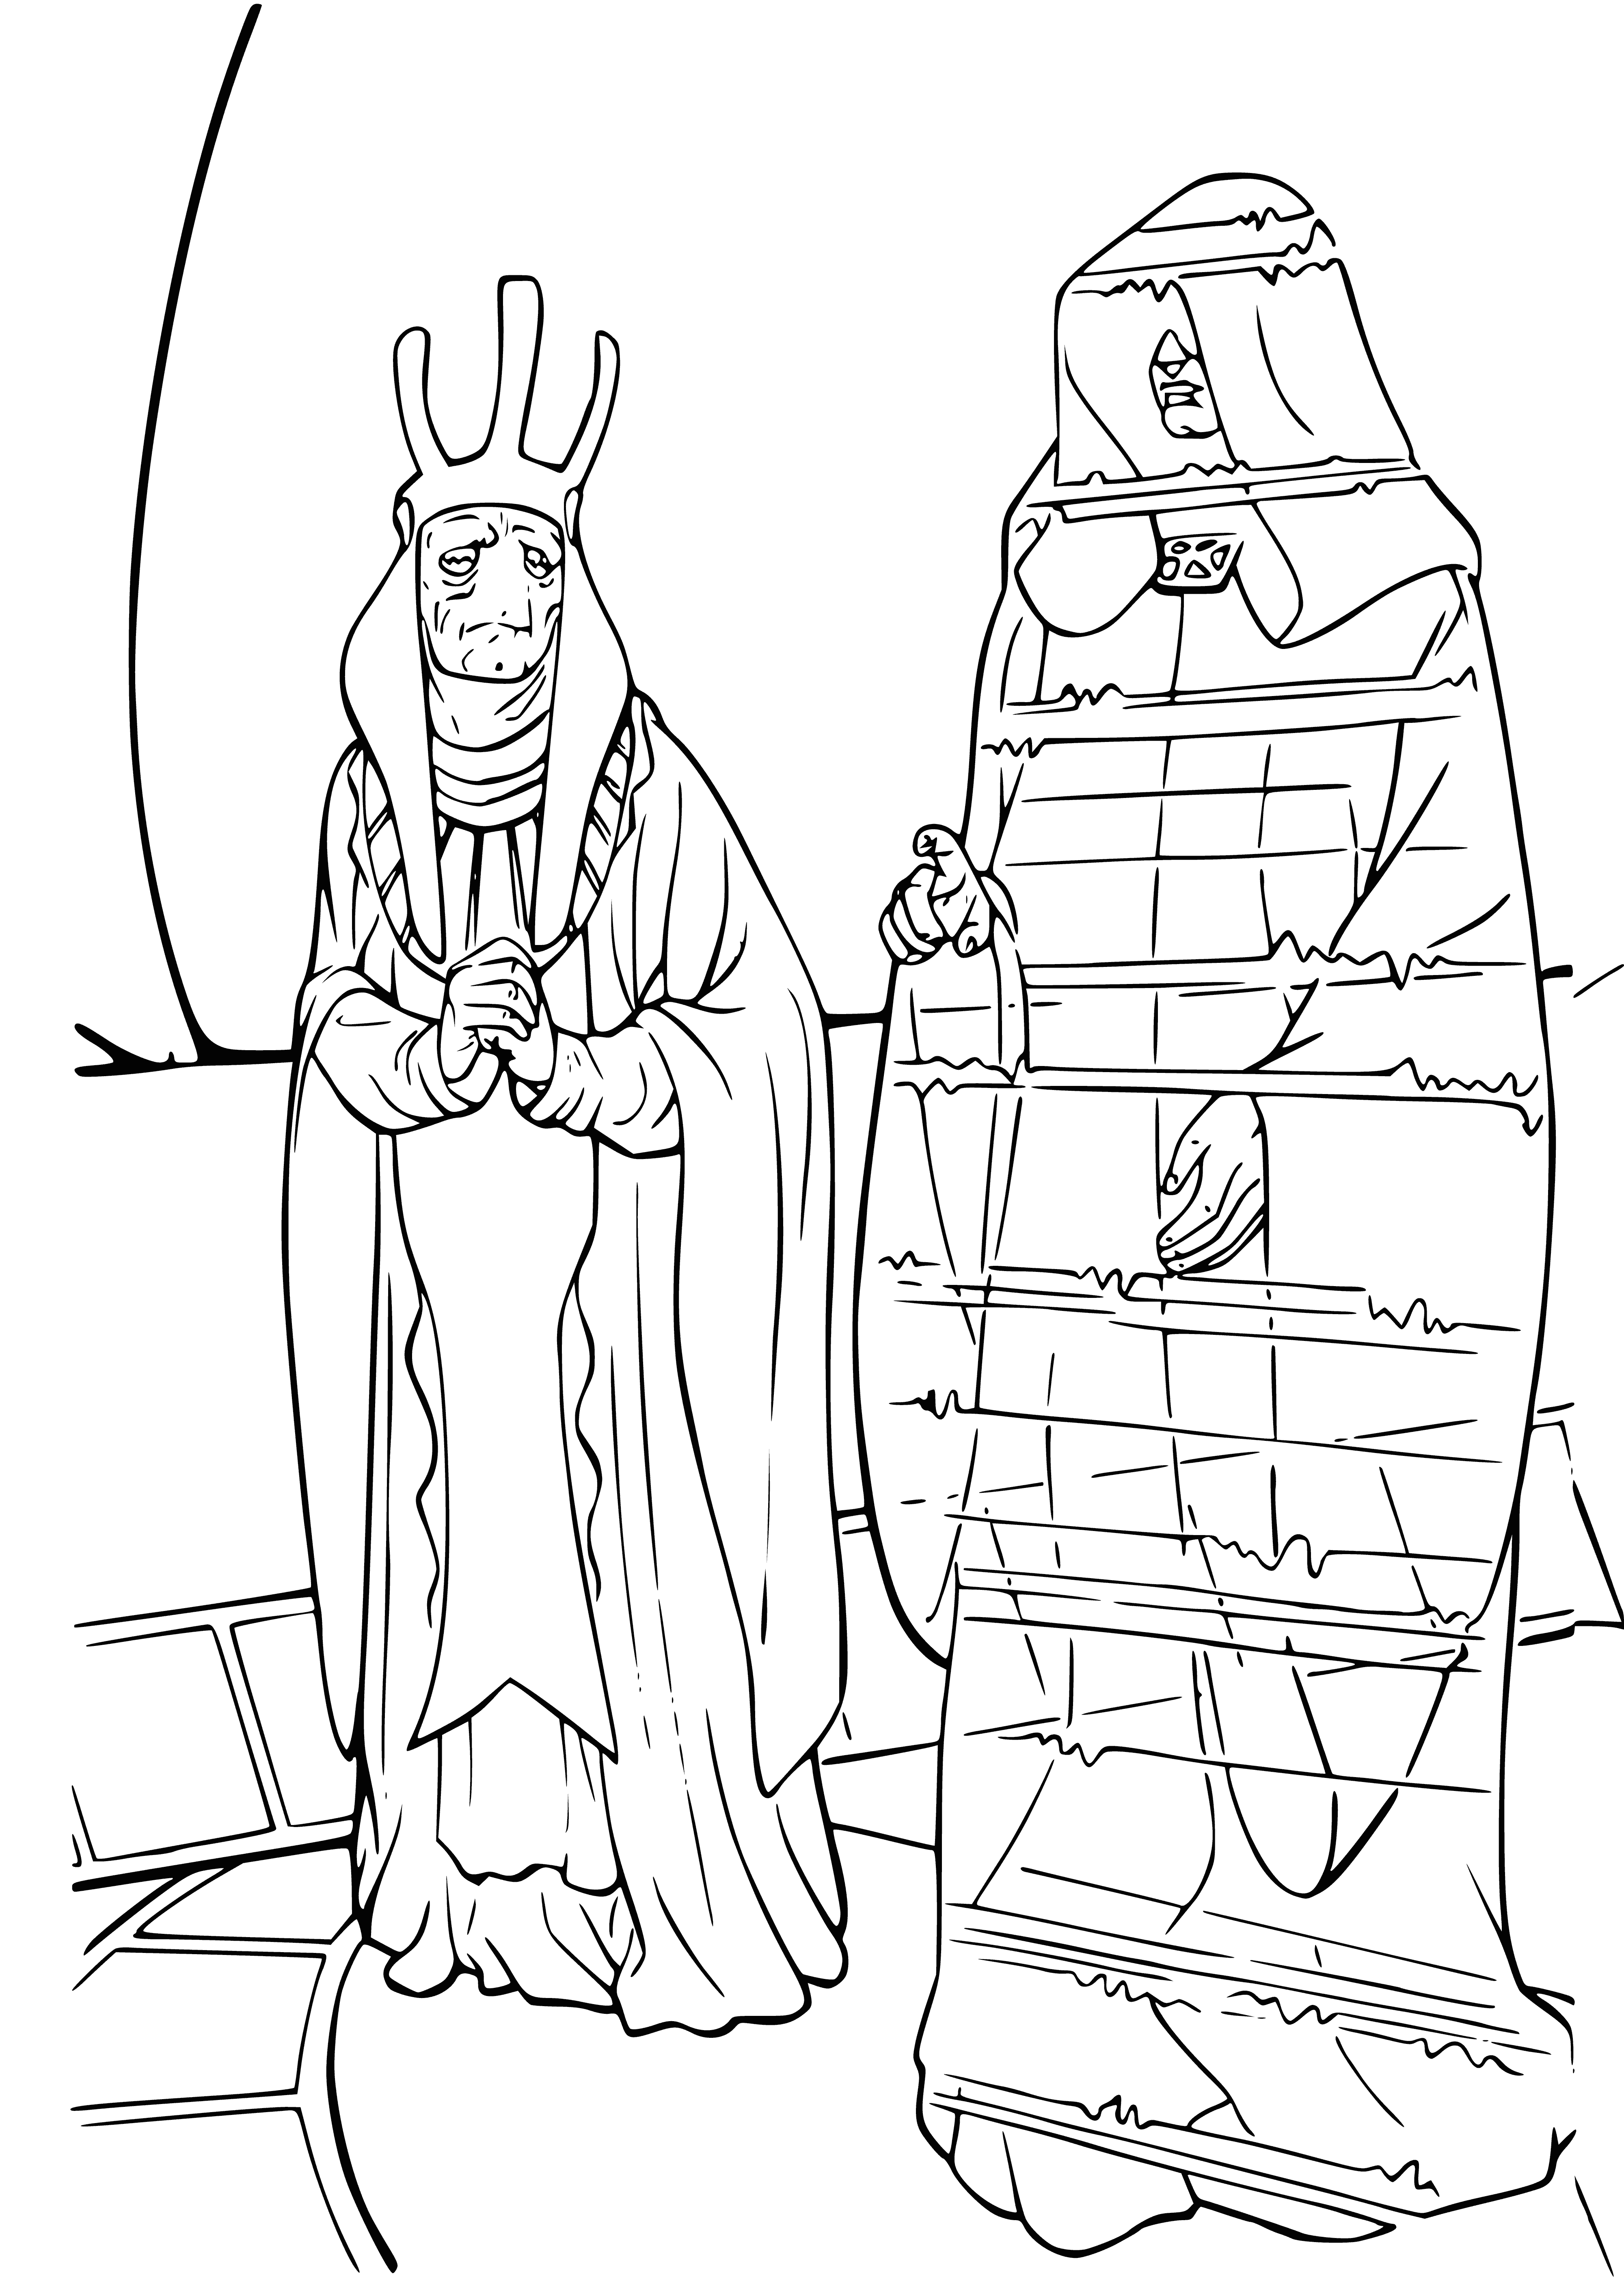 coloring page: Trade Federation reps in dark robes gather round a table with a hologram of a blue-skinned alien in the center. Discussion is serious.